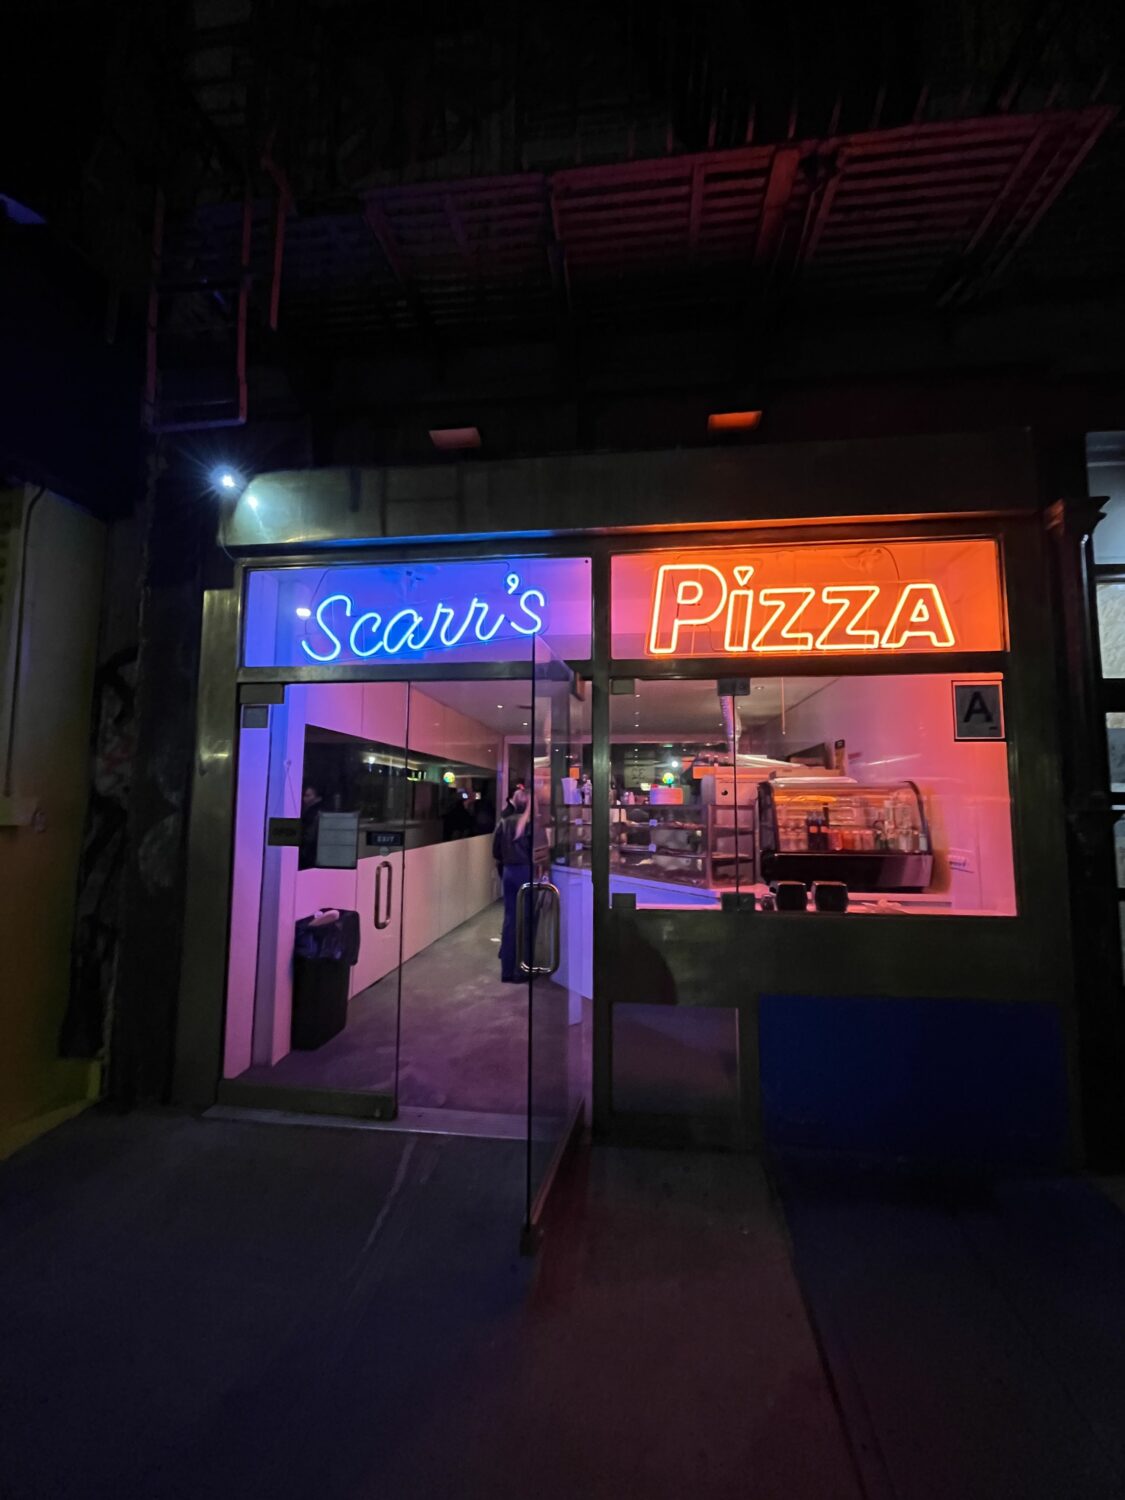 Scarr's Pizza frontage at night - blue and red neon lights. 